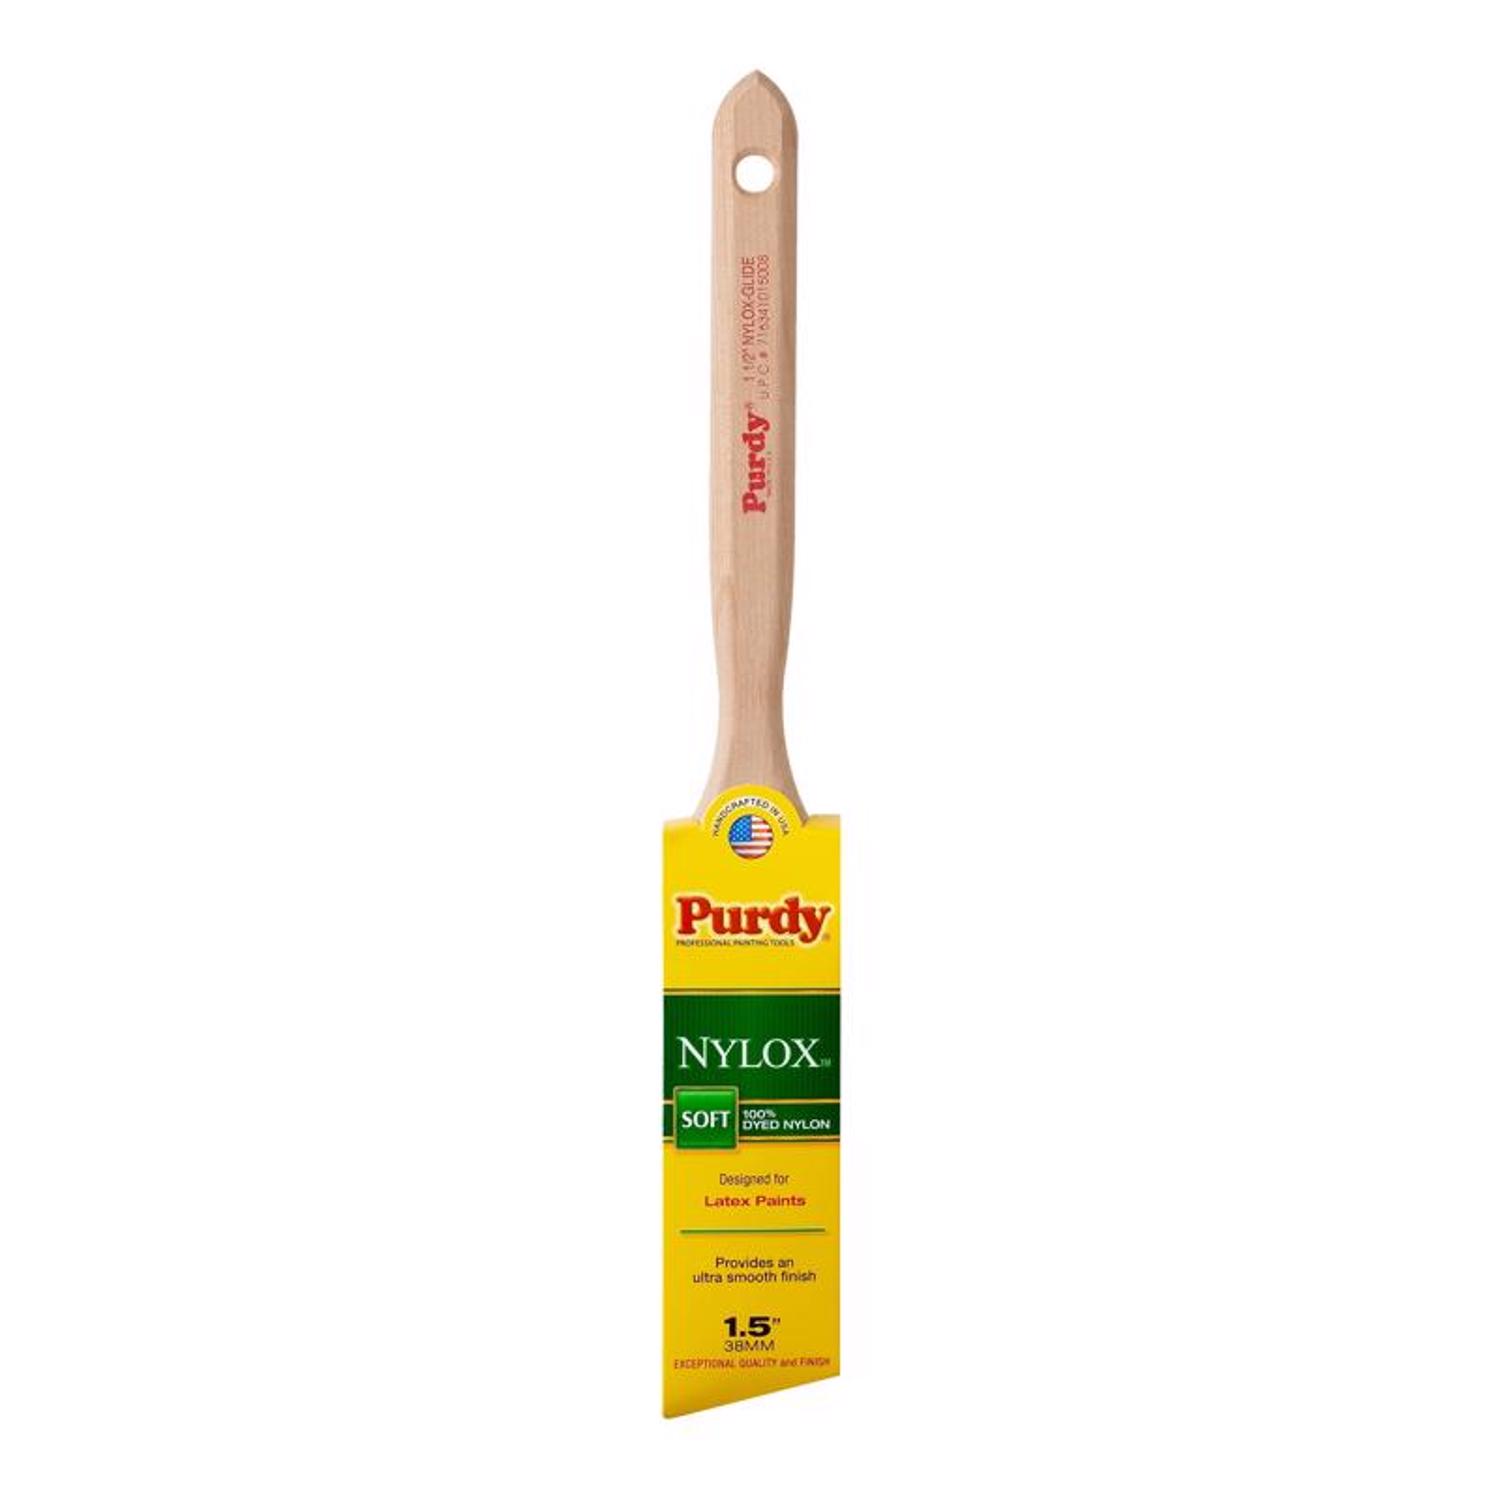 Photos - Putty Knife / Painting Tool Purdy Nylox Glide 1-1/2 in. Soft Angle Trim Paint Brush 144152215